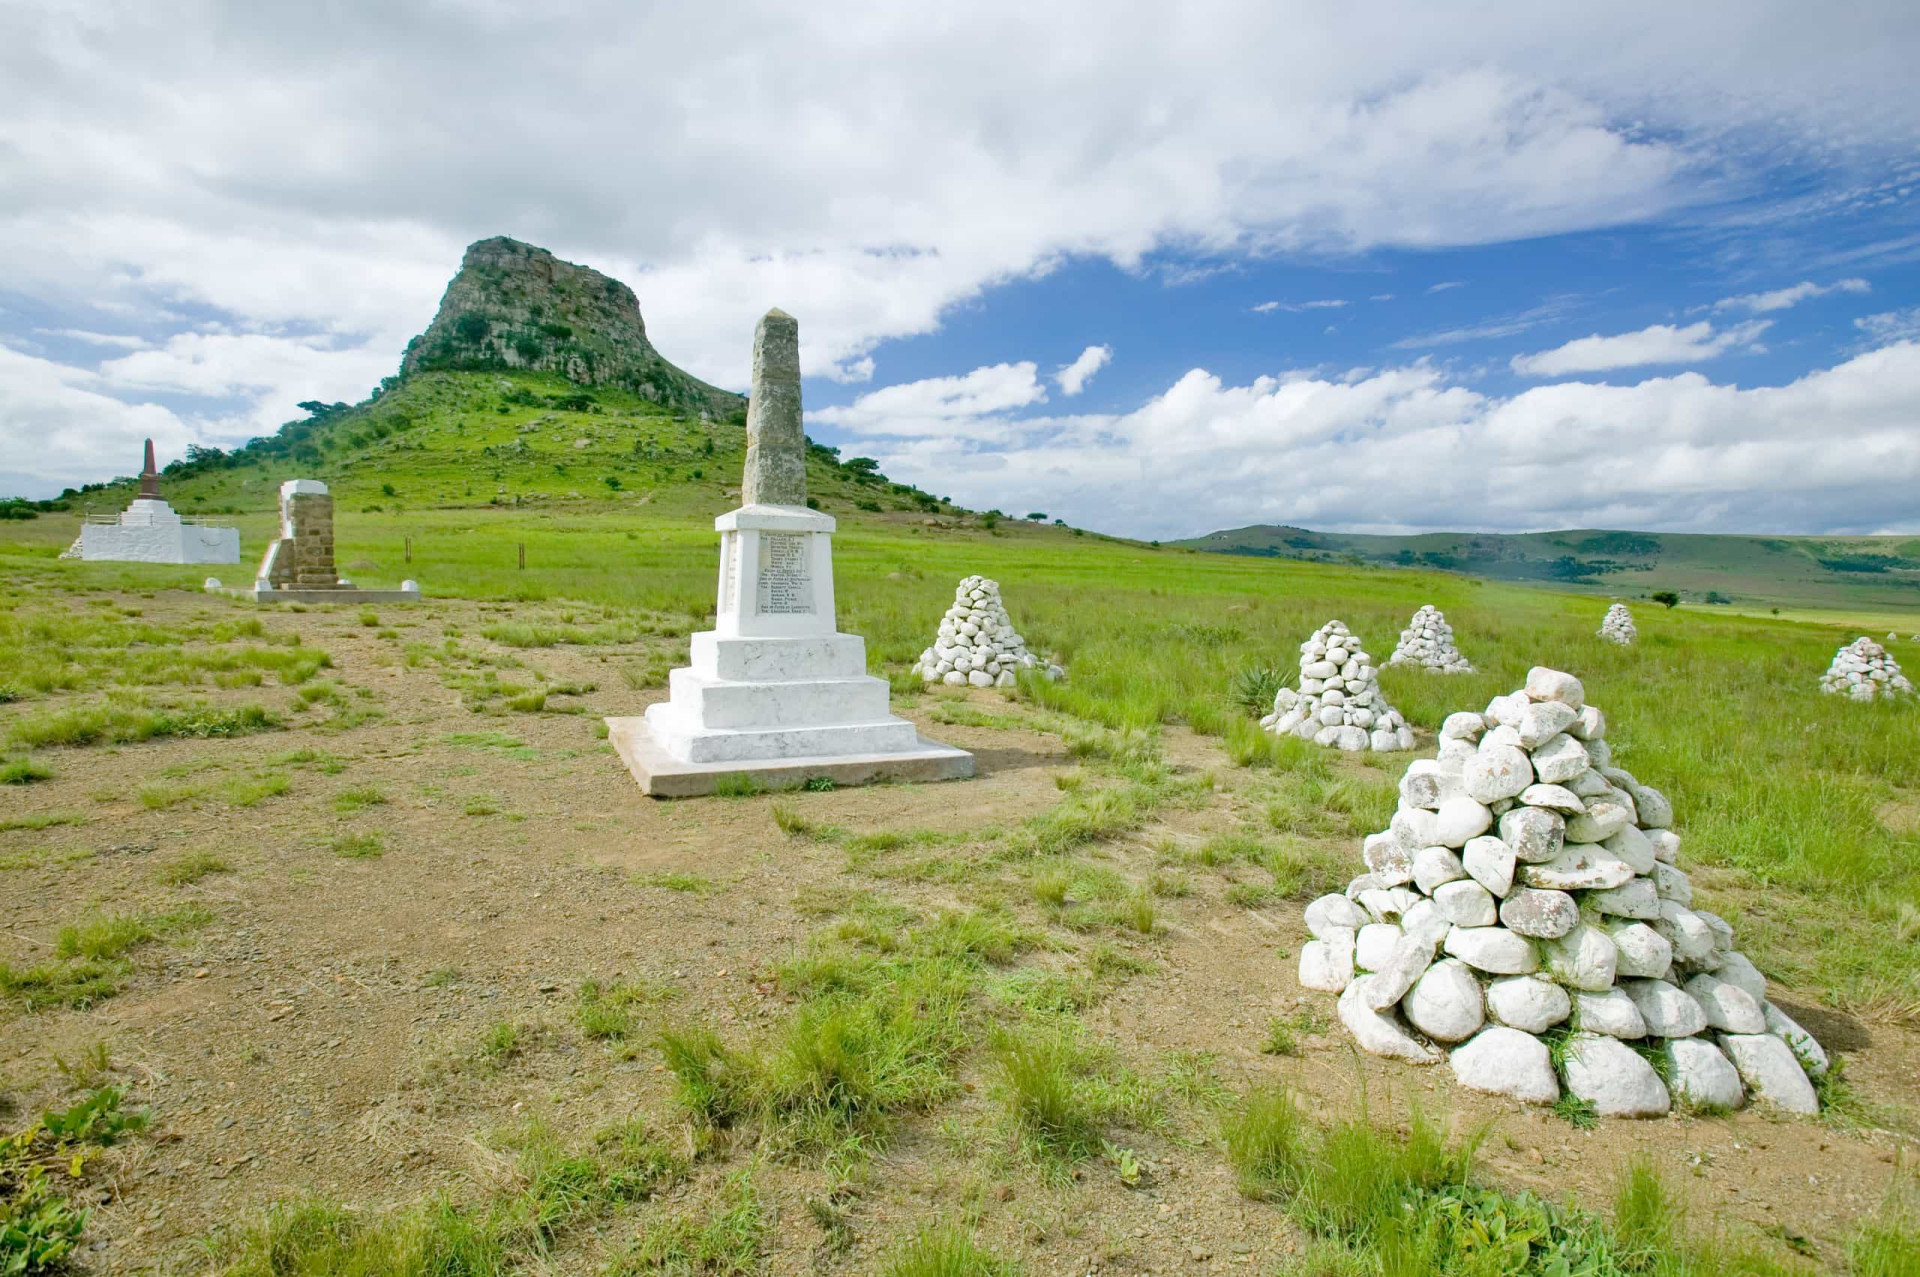 <p>The Battle of Isandlwana marked the first major encounter in the Anglo-Zulu War of 1879 between the British Empire and the Zulu Kingdom. Using mainly traditional spears and cow-hide shields, the Zulus, numbering some 20,000 warriors, easily overwhelmed a column of 1,800 British troops and support staff. The battlefield is set near an isolated hill in the KwaZulu-Natal province of South Africa.</p><p>You may also like:<a href="https://www.starsinsider.com/n/406338?utm_source=msn.com&utm_medium=display&utm_campaign=referral_description&utm_content=627984en-za"> Common cooking mistakes and how to fix them</a></p>